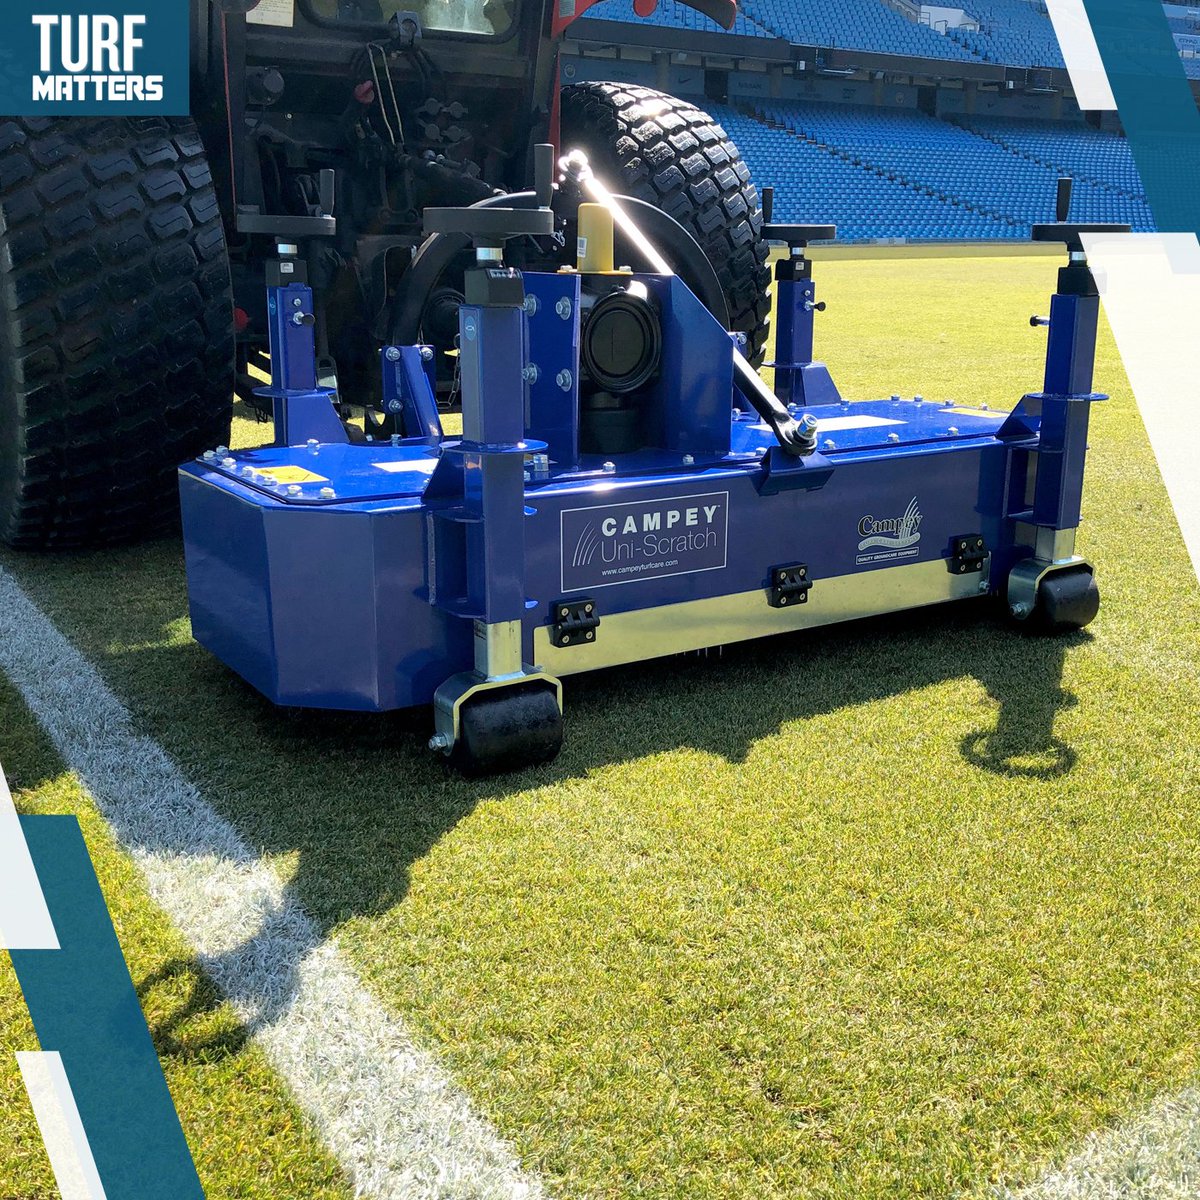 #TurfNews @CampeyTurfCare Australasia was launched in 2022 and is delighted to announce that it will be exhibiting at ASTMA 2024. Read more 👉 turfmatters.co.uk/campey-austral…